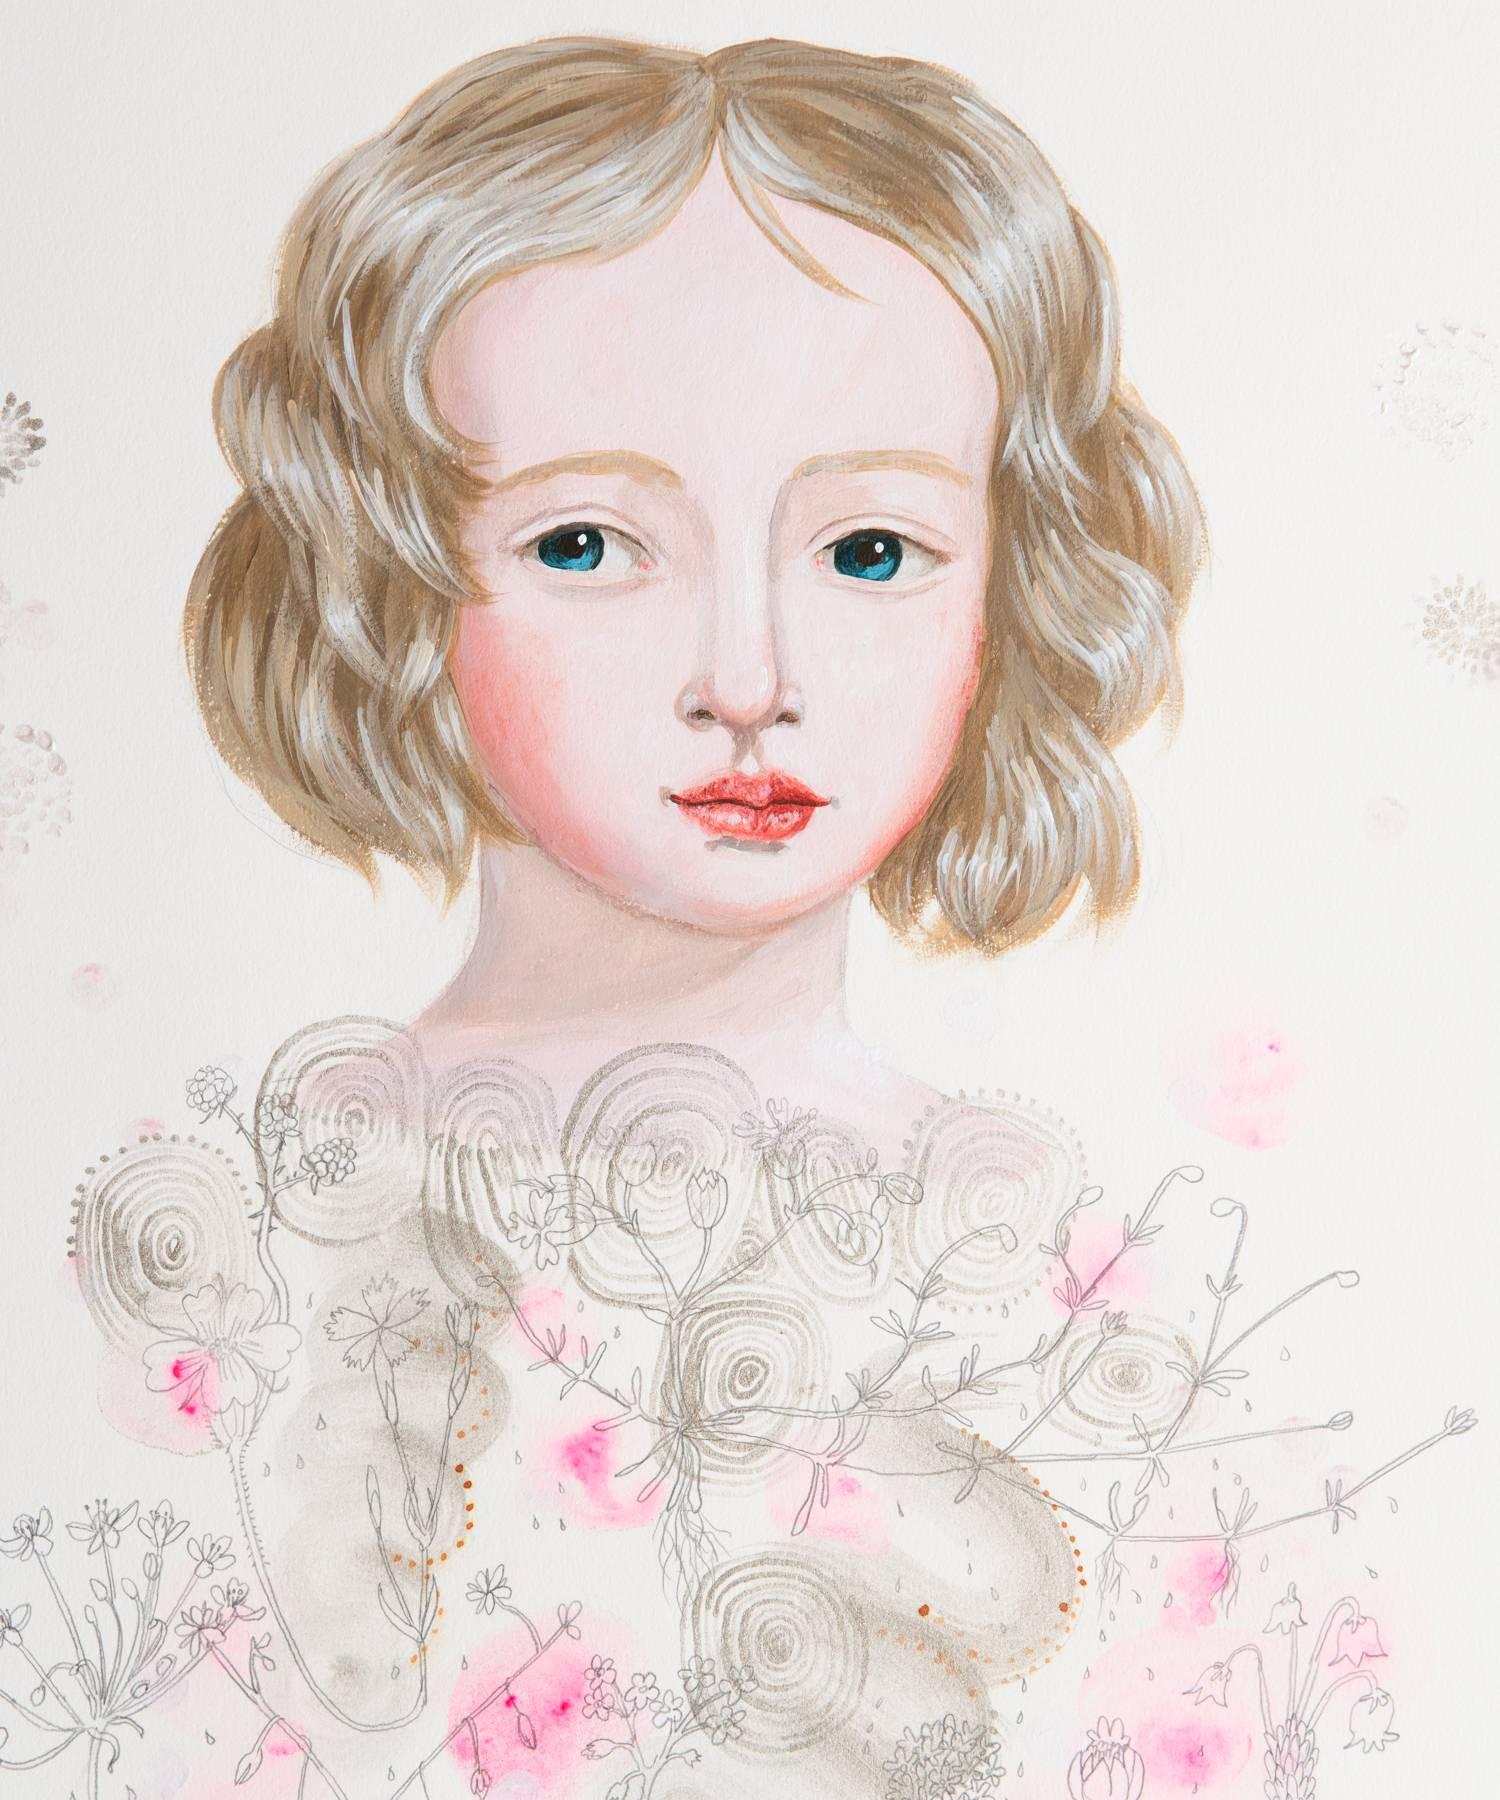 Delicate Girl Drawing - Contemporary Mixed Media Art by Anne Siems